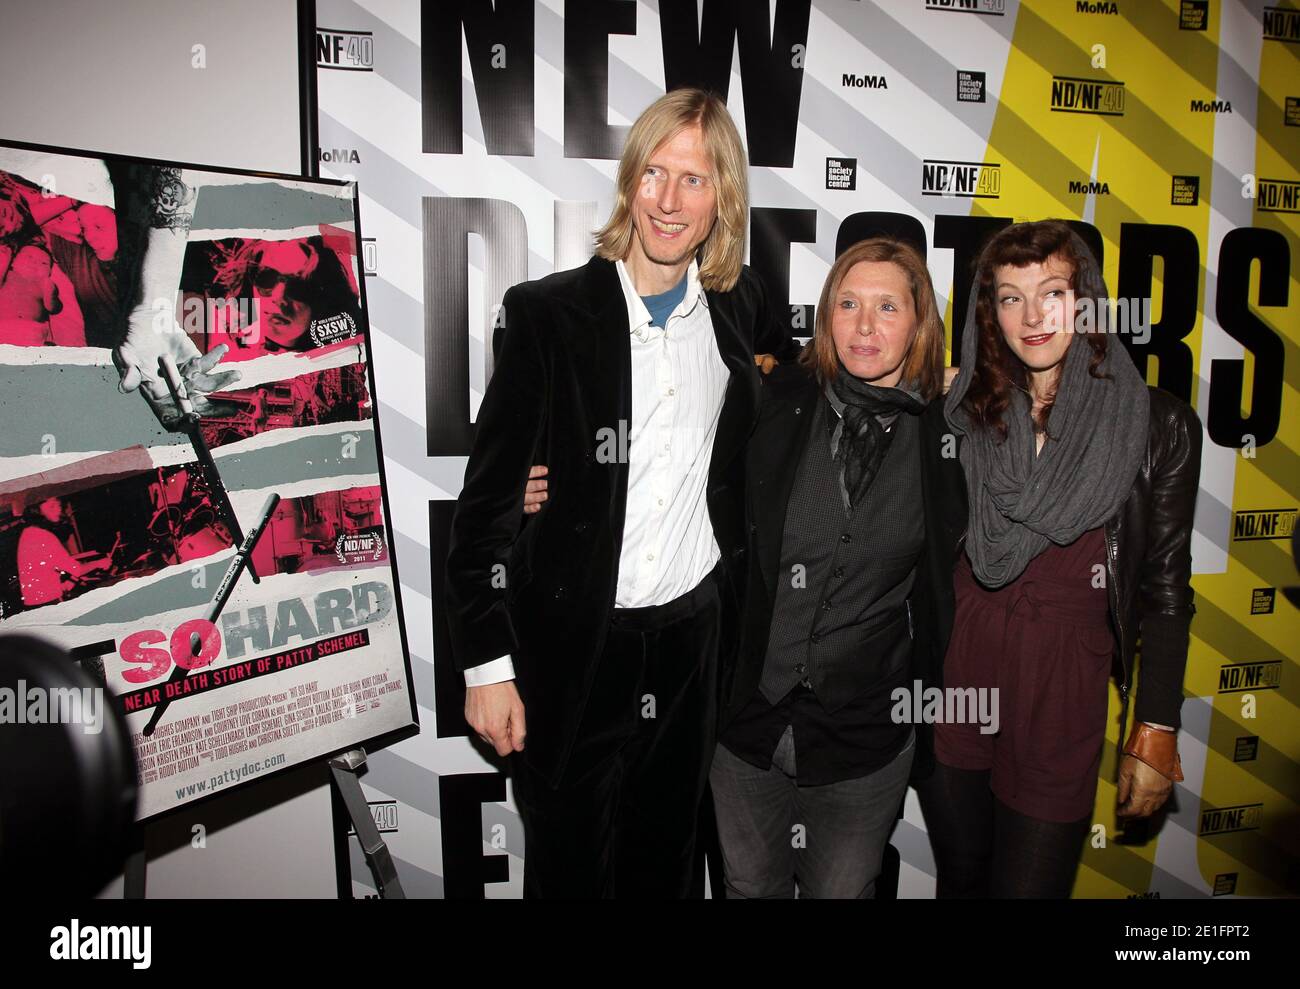 Musicians/film subjects (L-R) Eric Erlandson, Patty Schemel and Melissa auf der Maur attend the 2011 New Directors/New Films screening of 'Hit So Hard' at The Museum of Modern Art in New York City, NY, USA on March 28, 2011. Photo by Charles Guerin/ABACAPRESS.COM Stock Photo